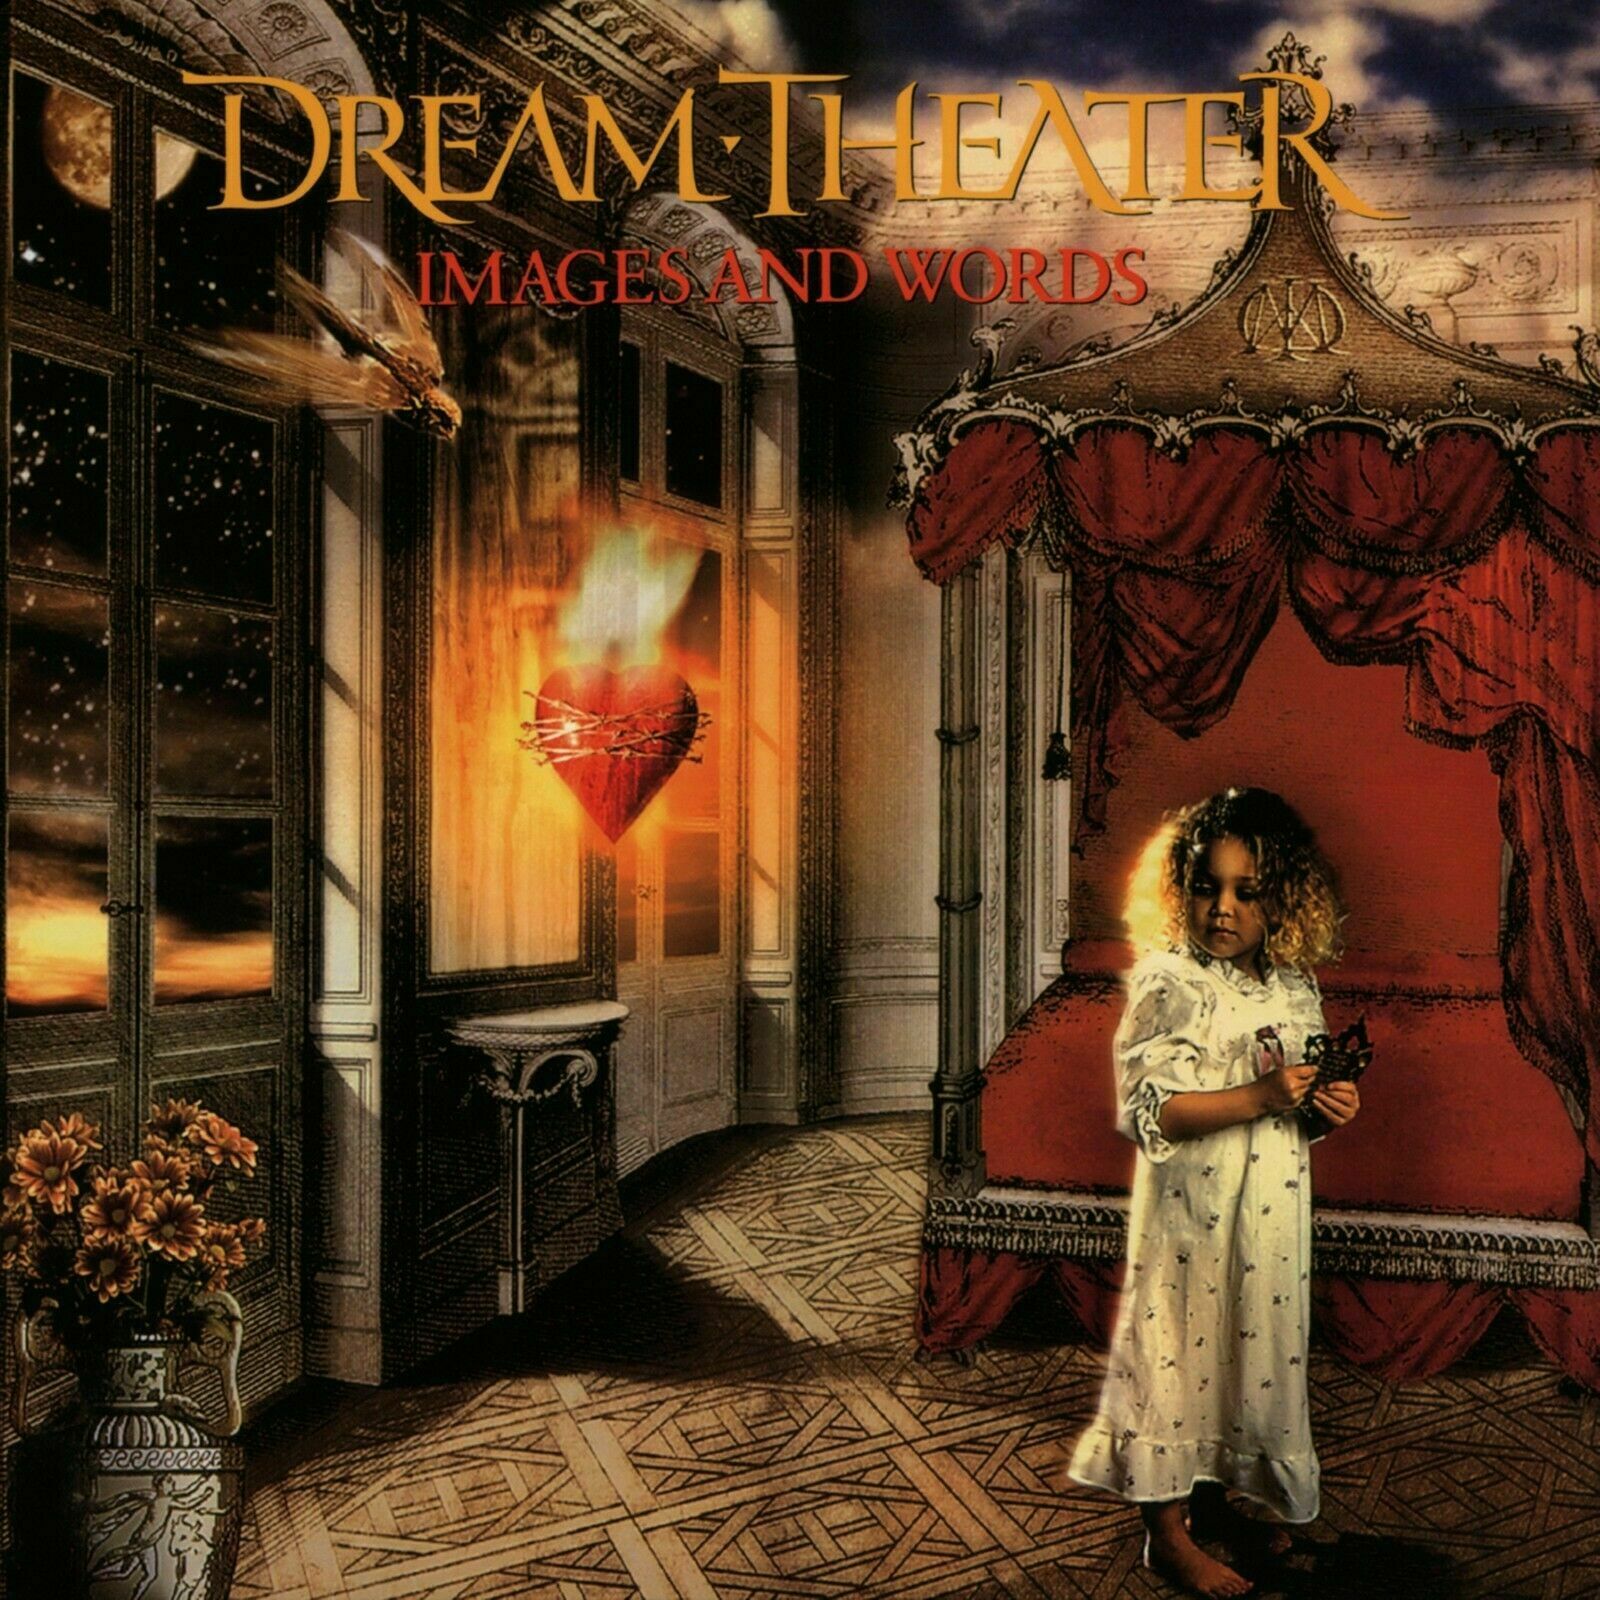 Dream Theater Images And Words Banner Huge 4x4 Ft Fabric Poster Tapestry Album